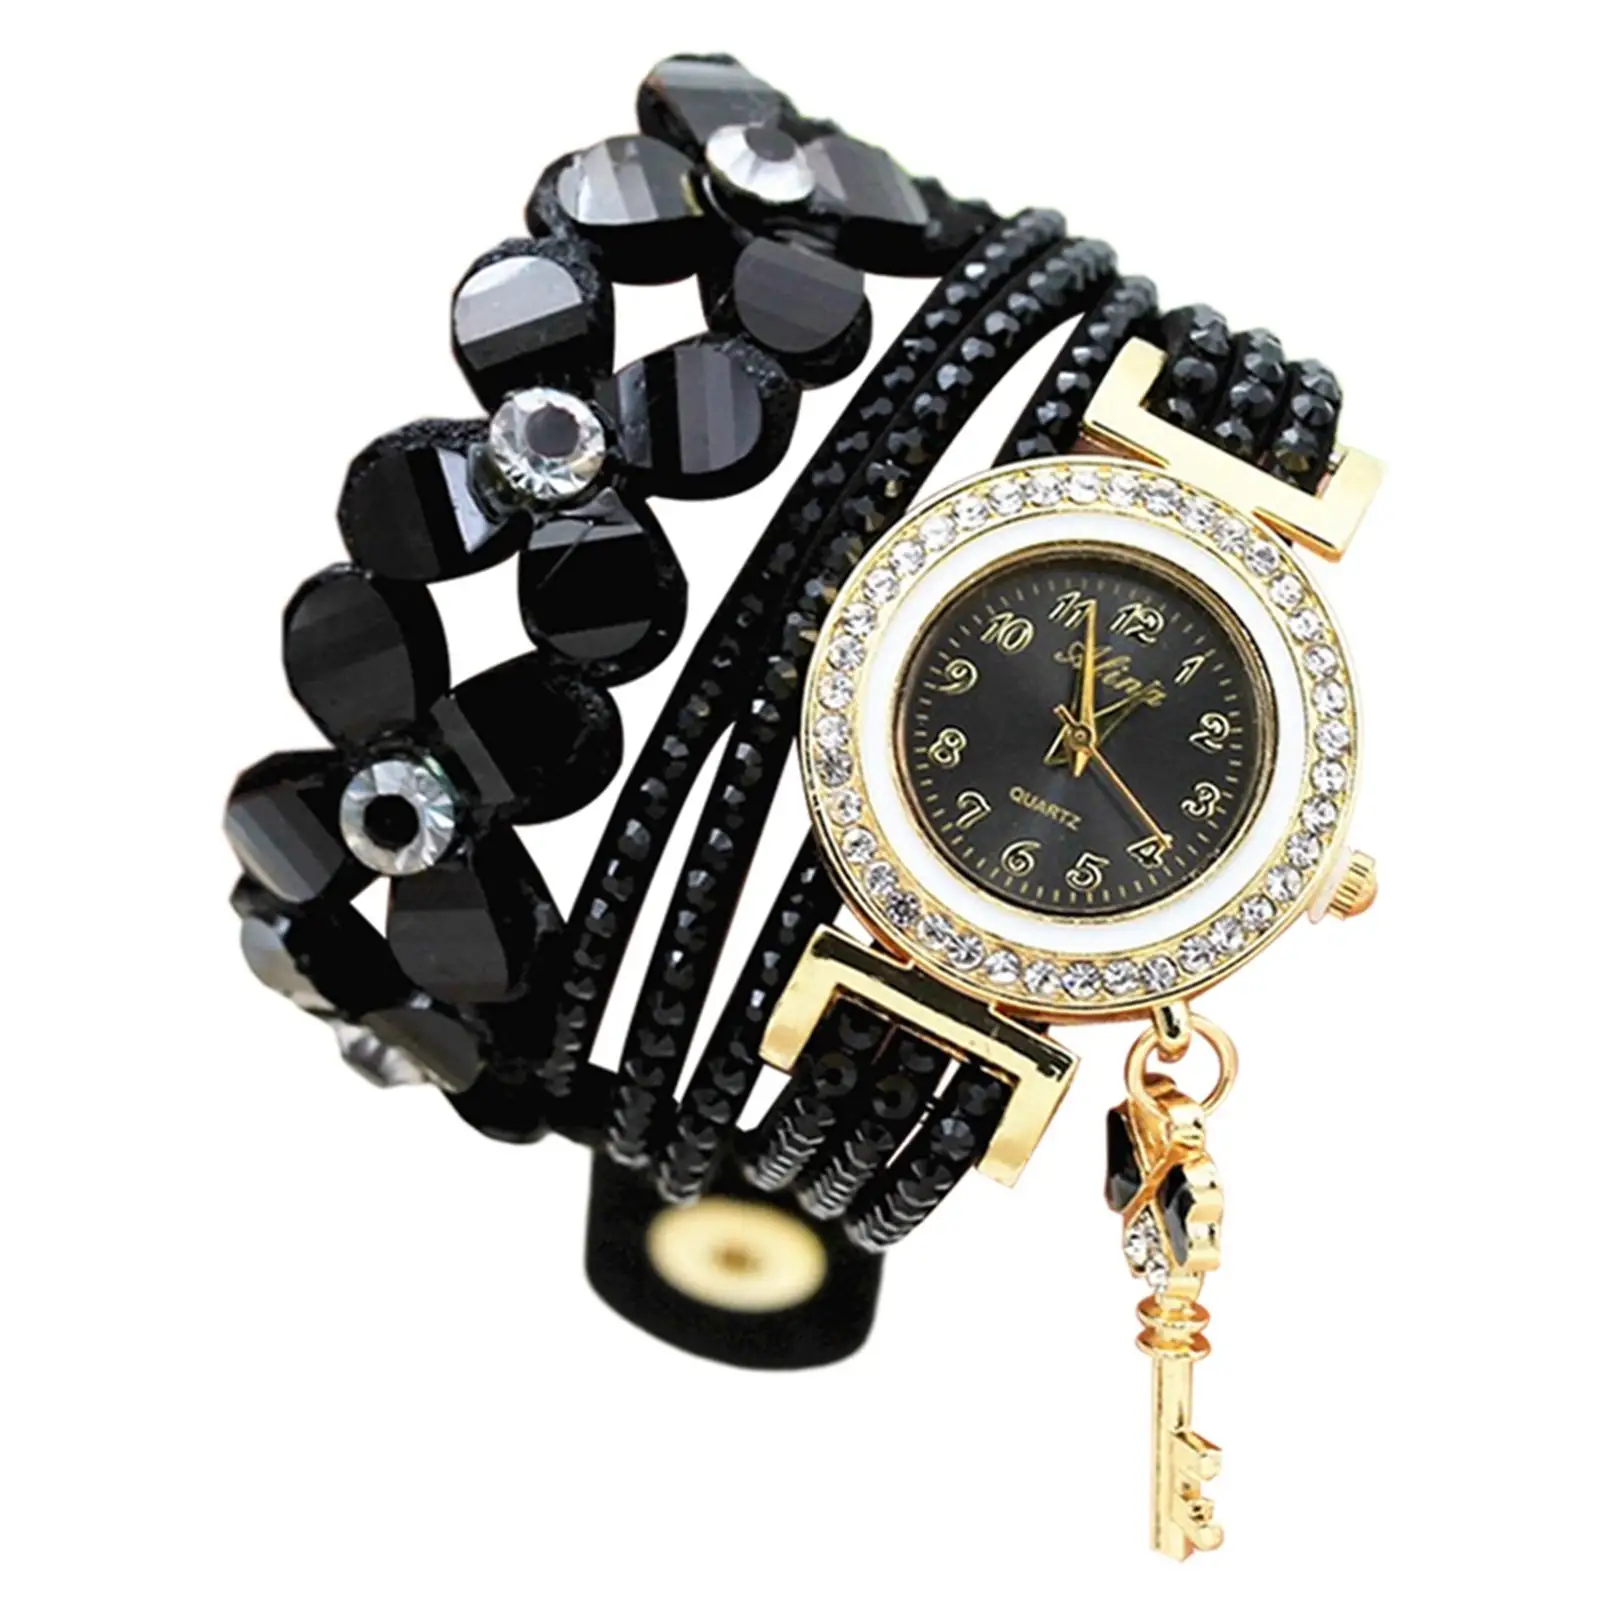 Bracelet Watch Time Display Fashion Casual Women Versatile Decorative Women Watch for Travel Shopping Street Birthday Gift Party